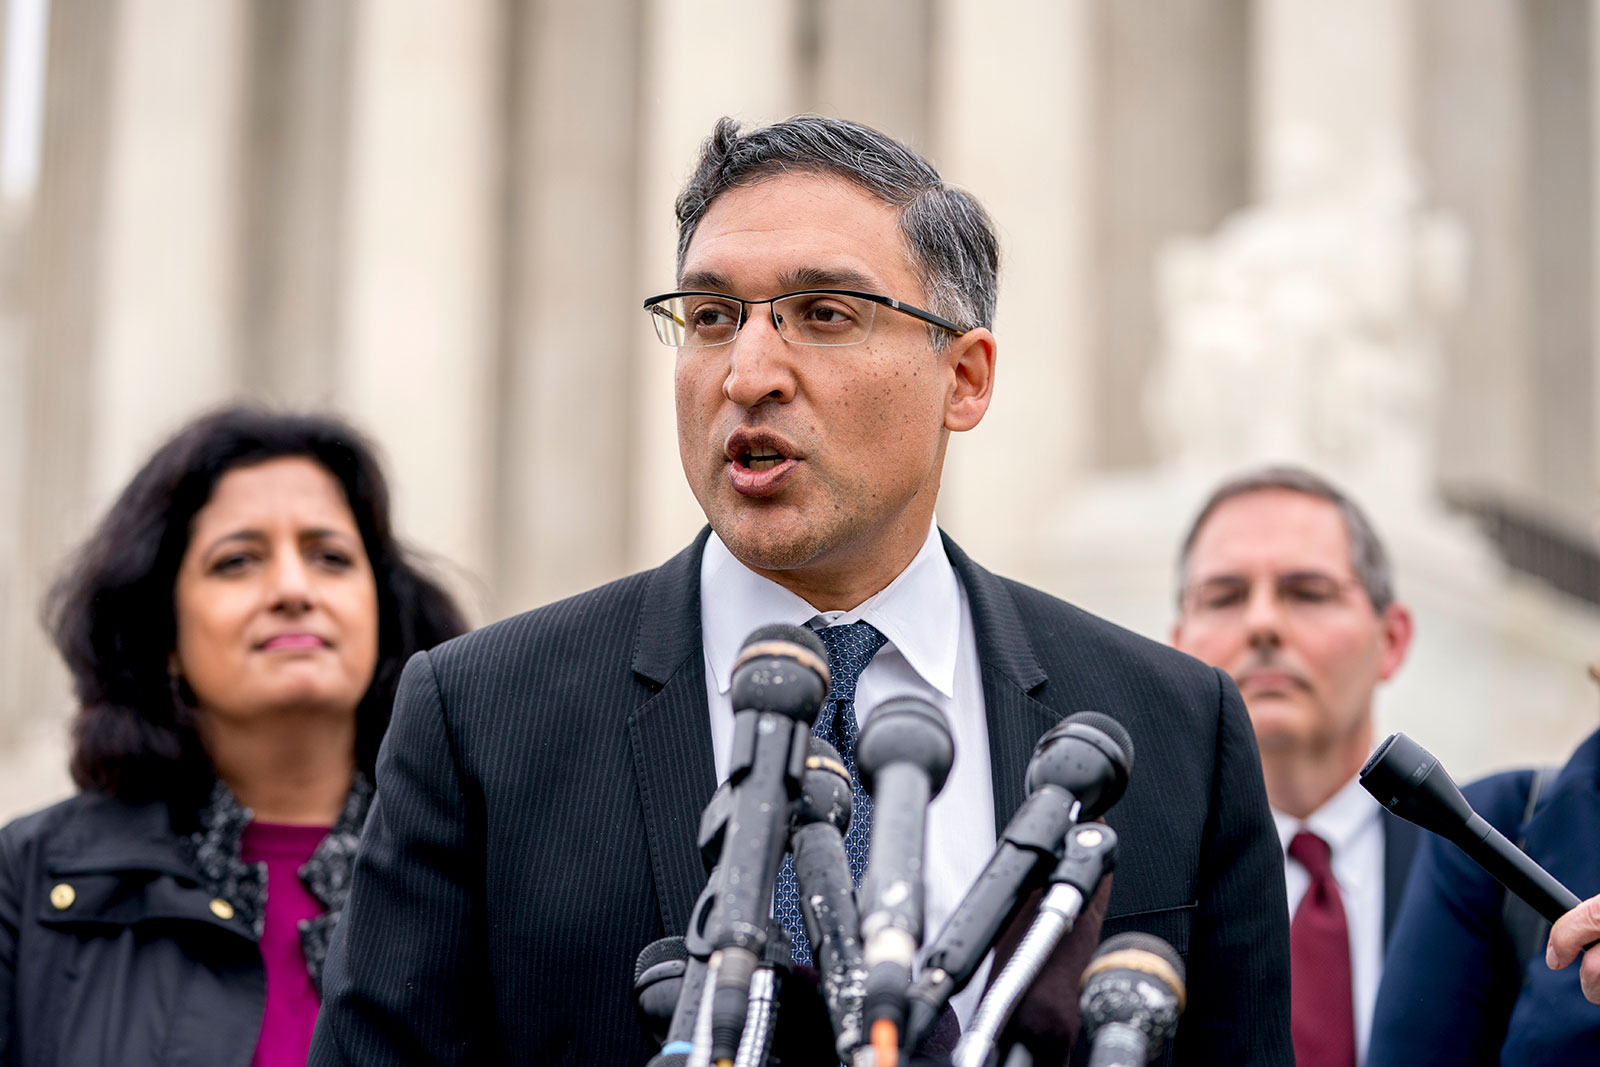 Neal Katyal speaks to members of the media outside the Supreme Court in 2018.